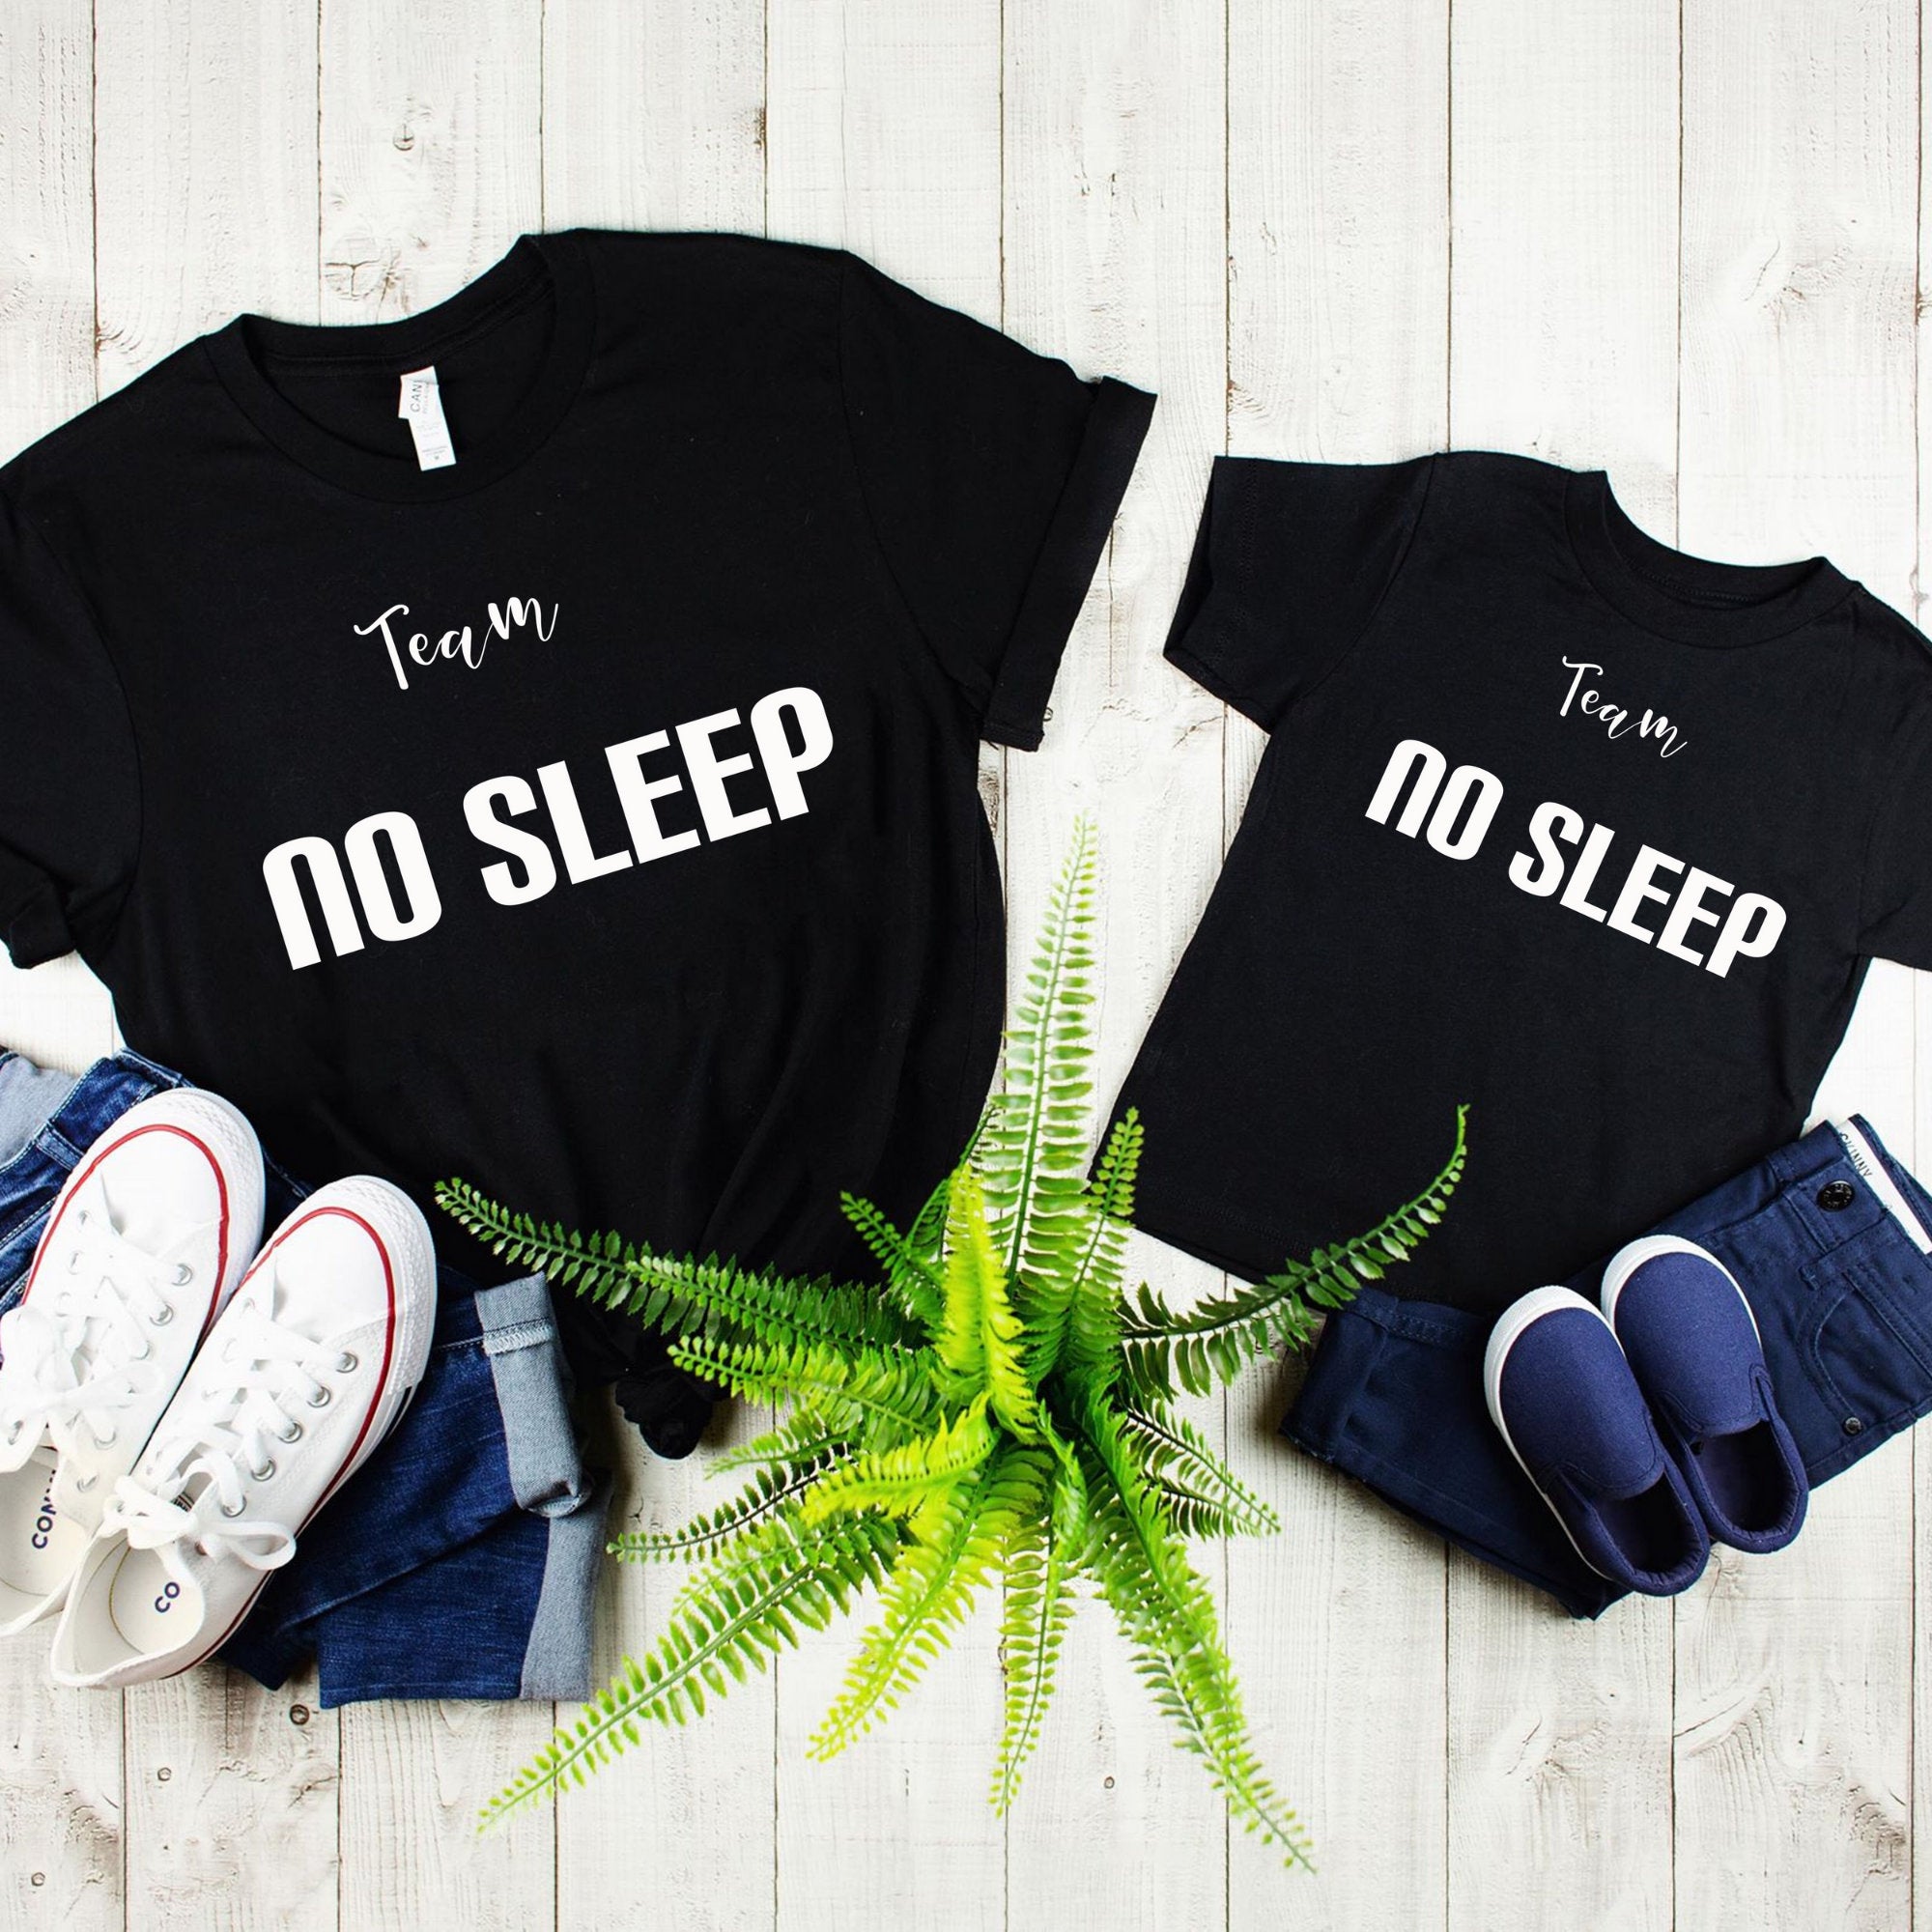 Dad and Son Team No Sleep Tee,Father and Son Matching Shirts ,Father Daughter Matching, Father Son Matching Shirts, Matching Family Shirt - MamaBuzz Creations